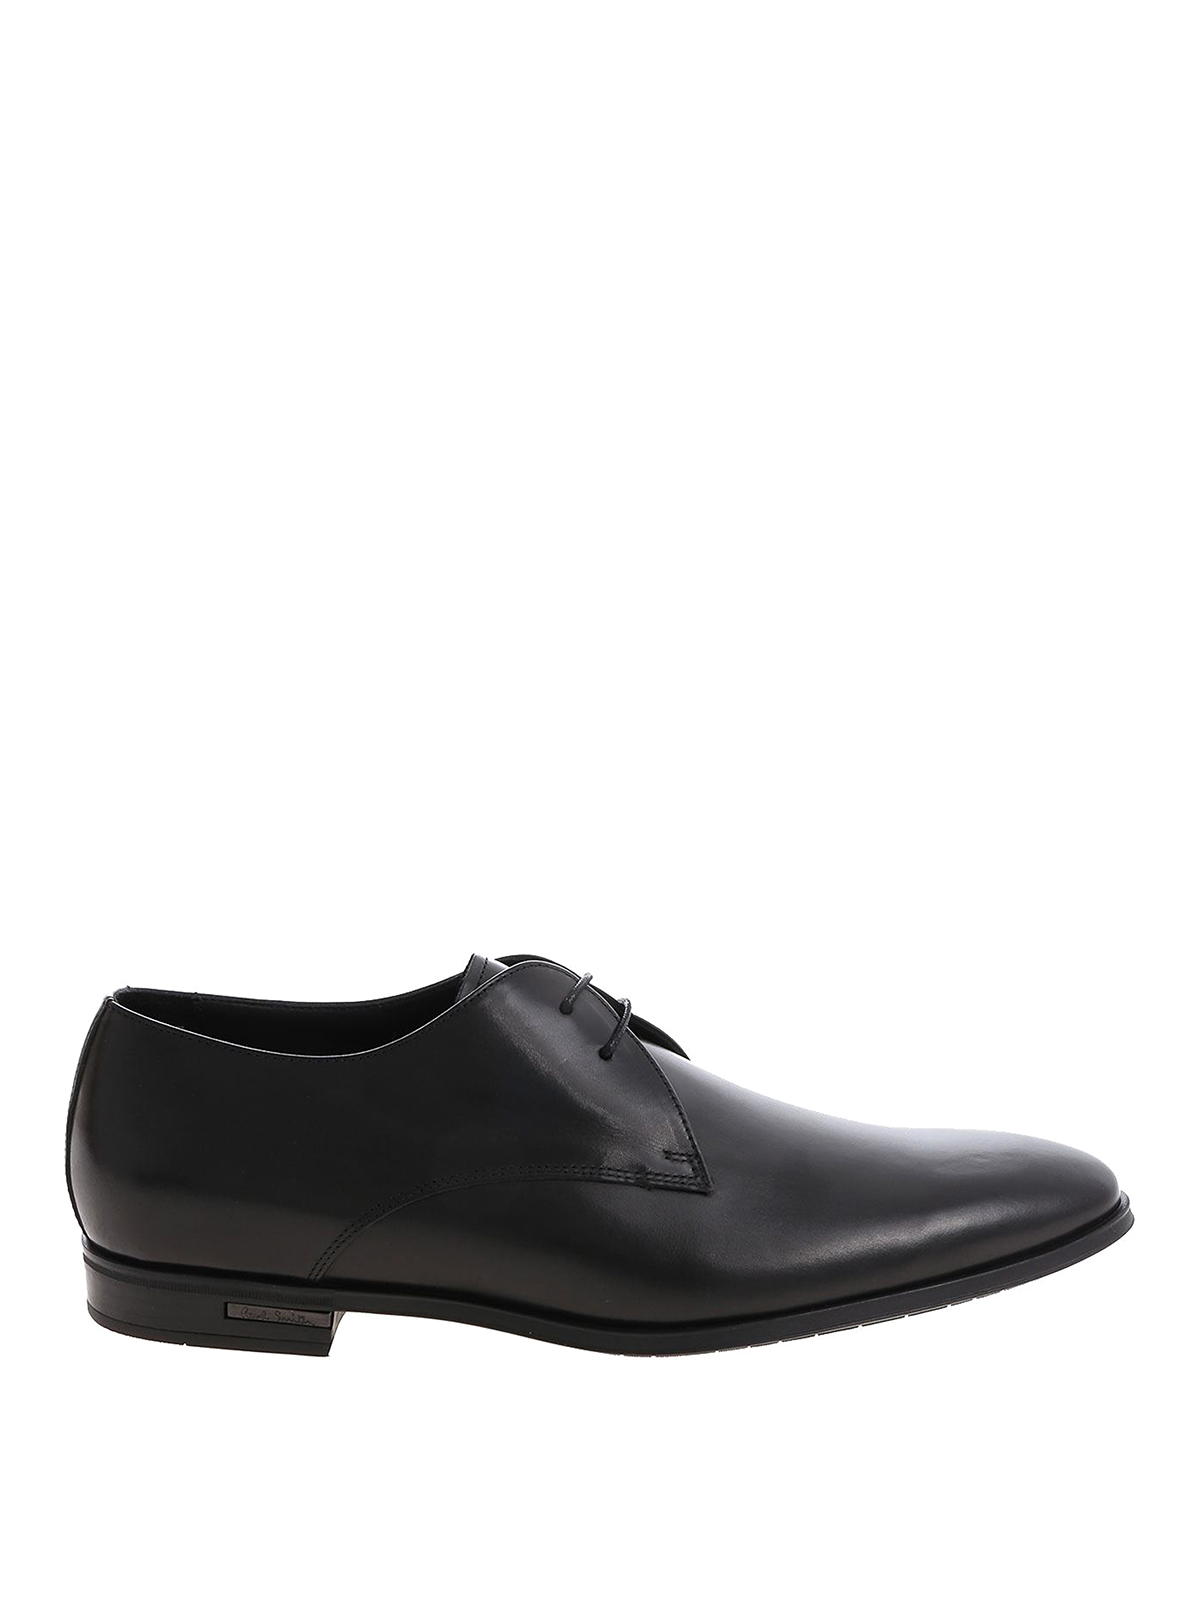 Paul Smith Coney Derby Shoes In Negro